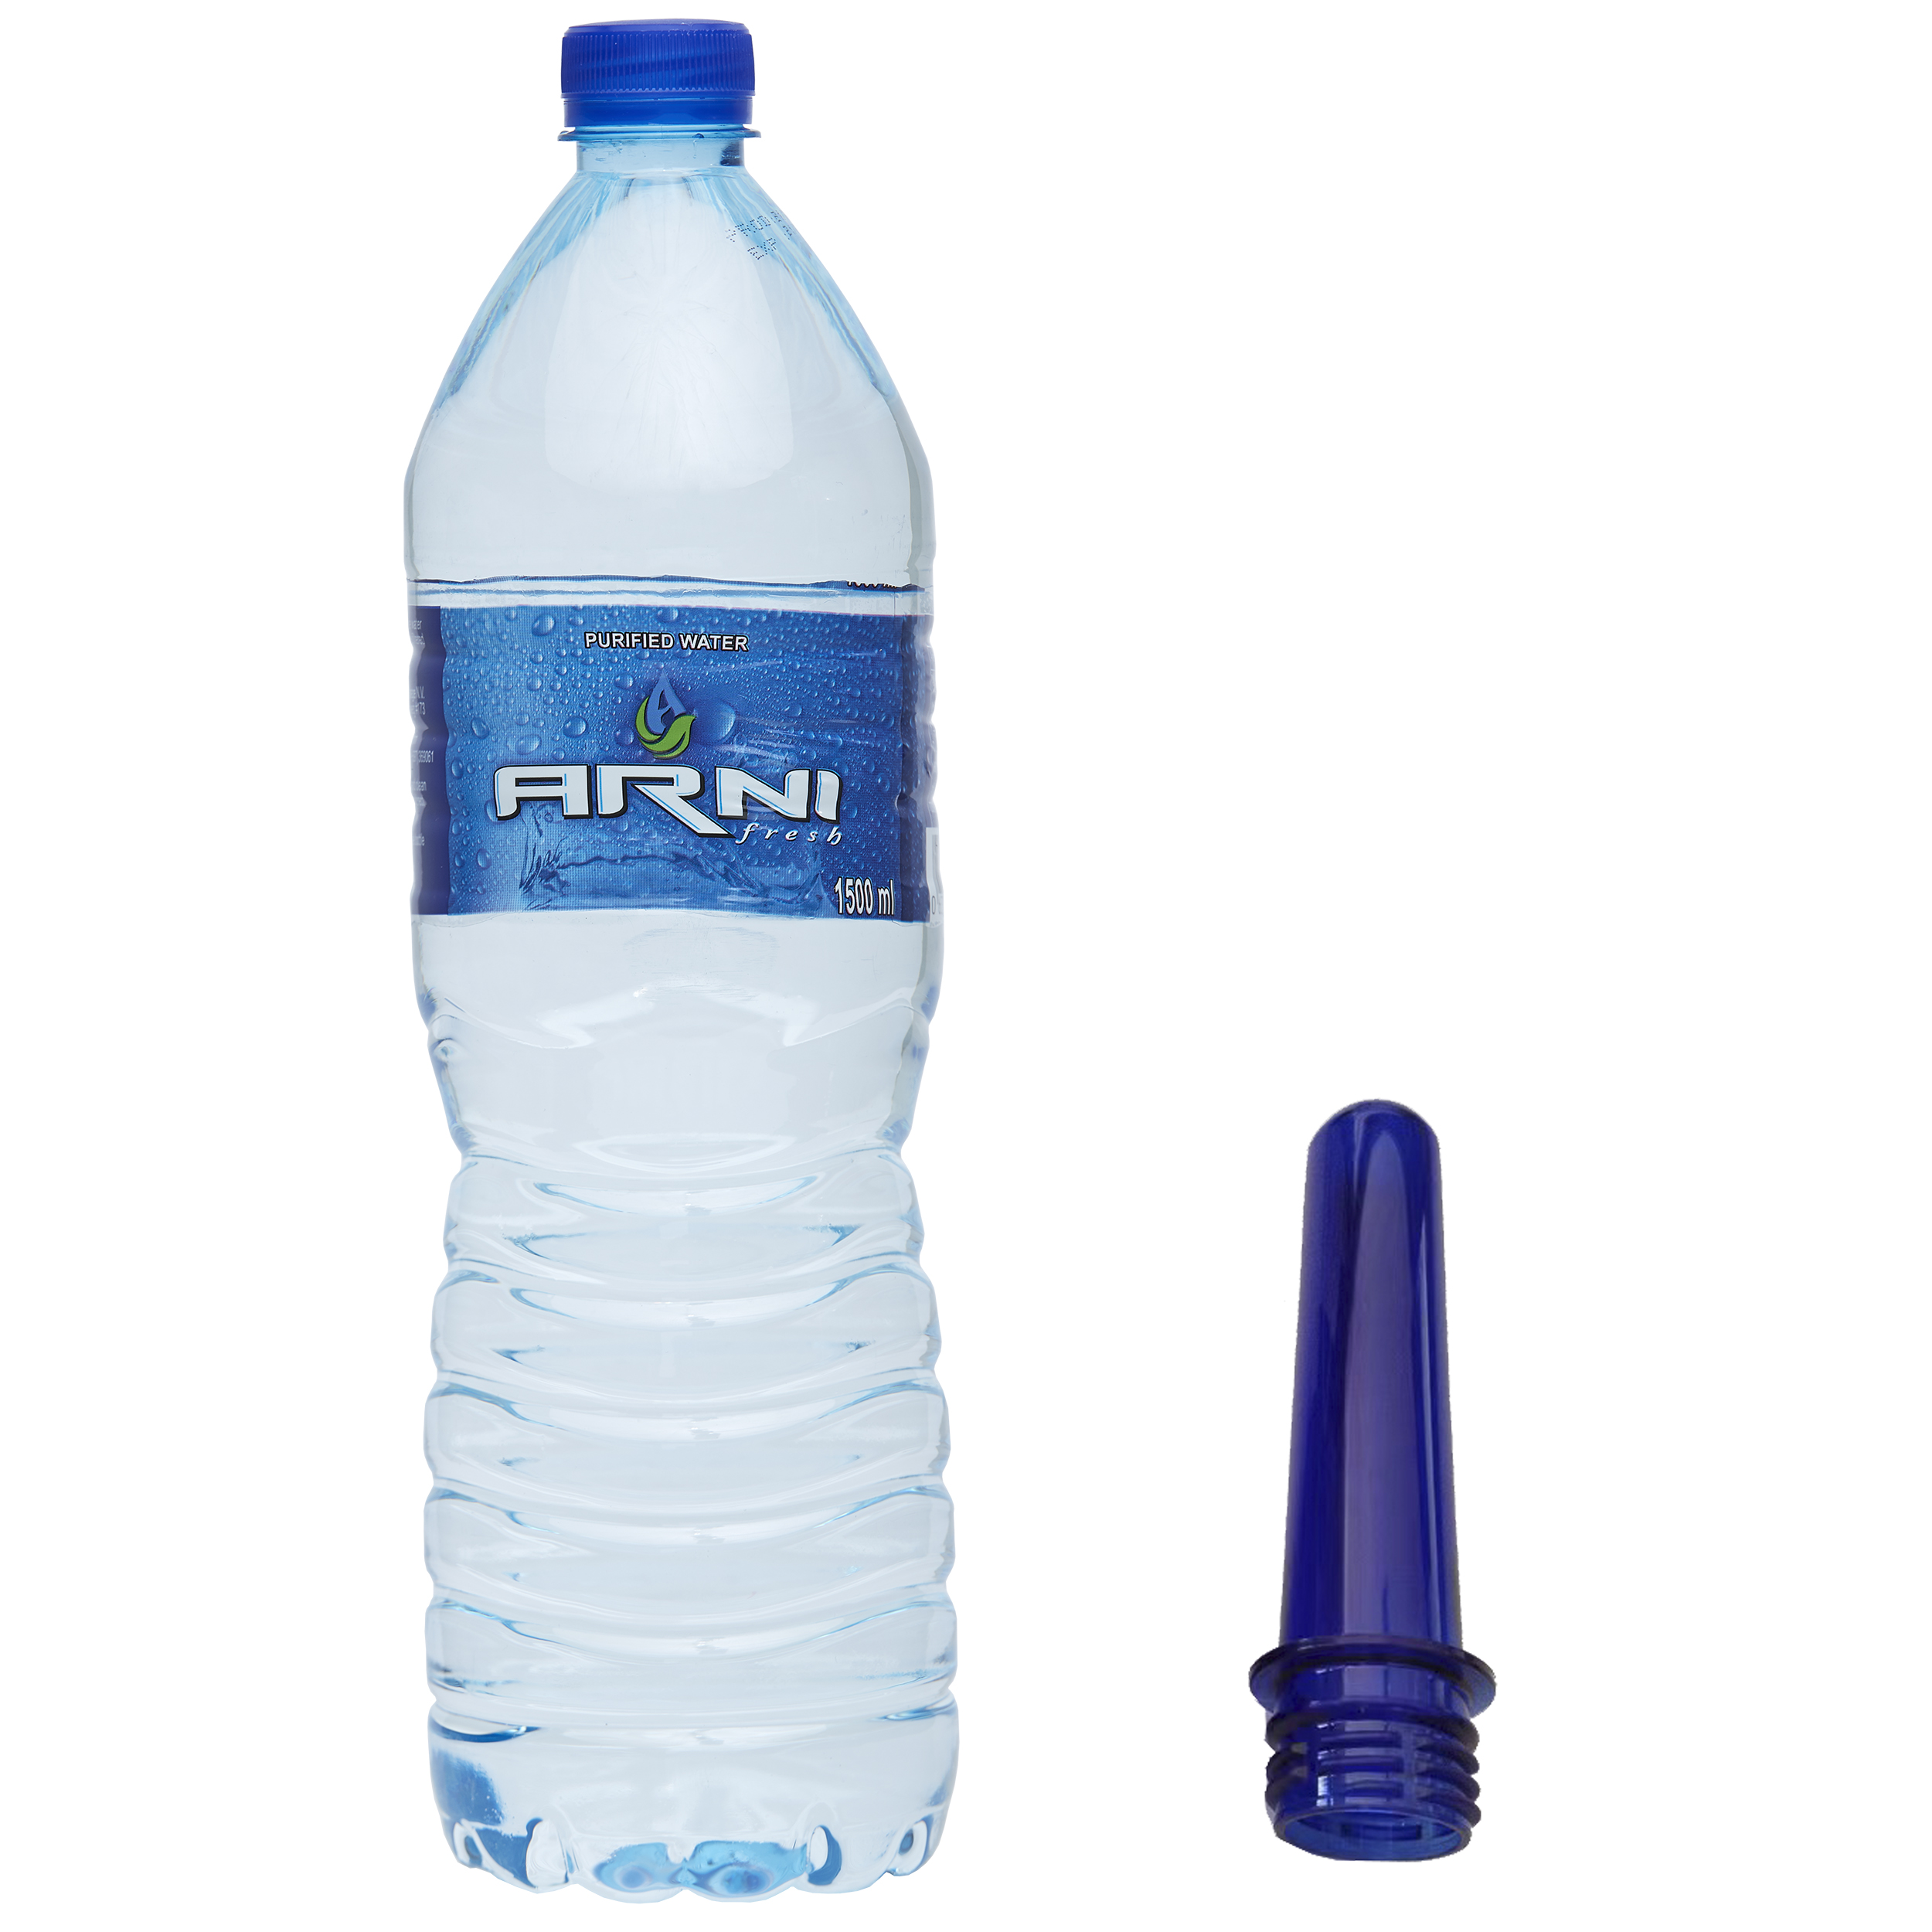 PREFROM FOR water bottle 1